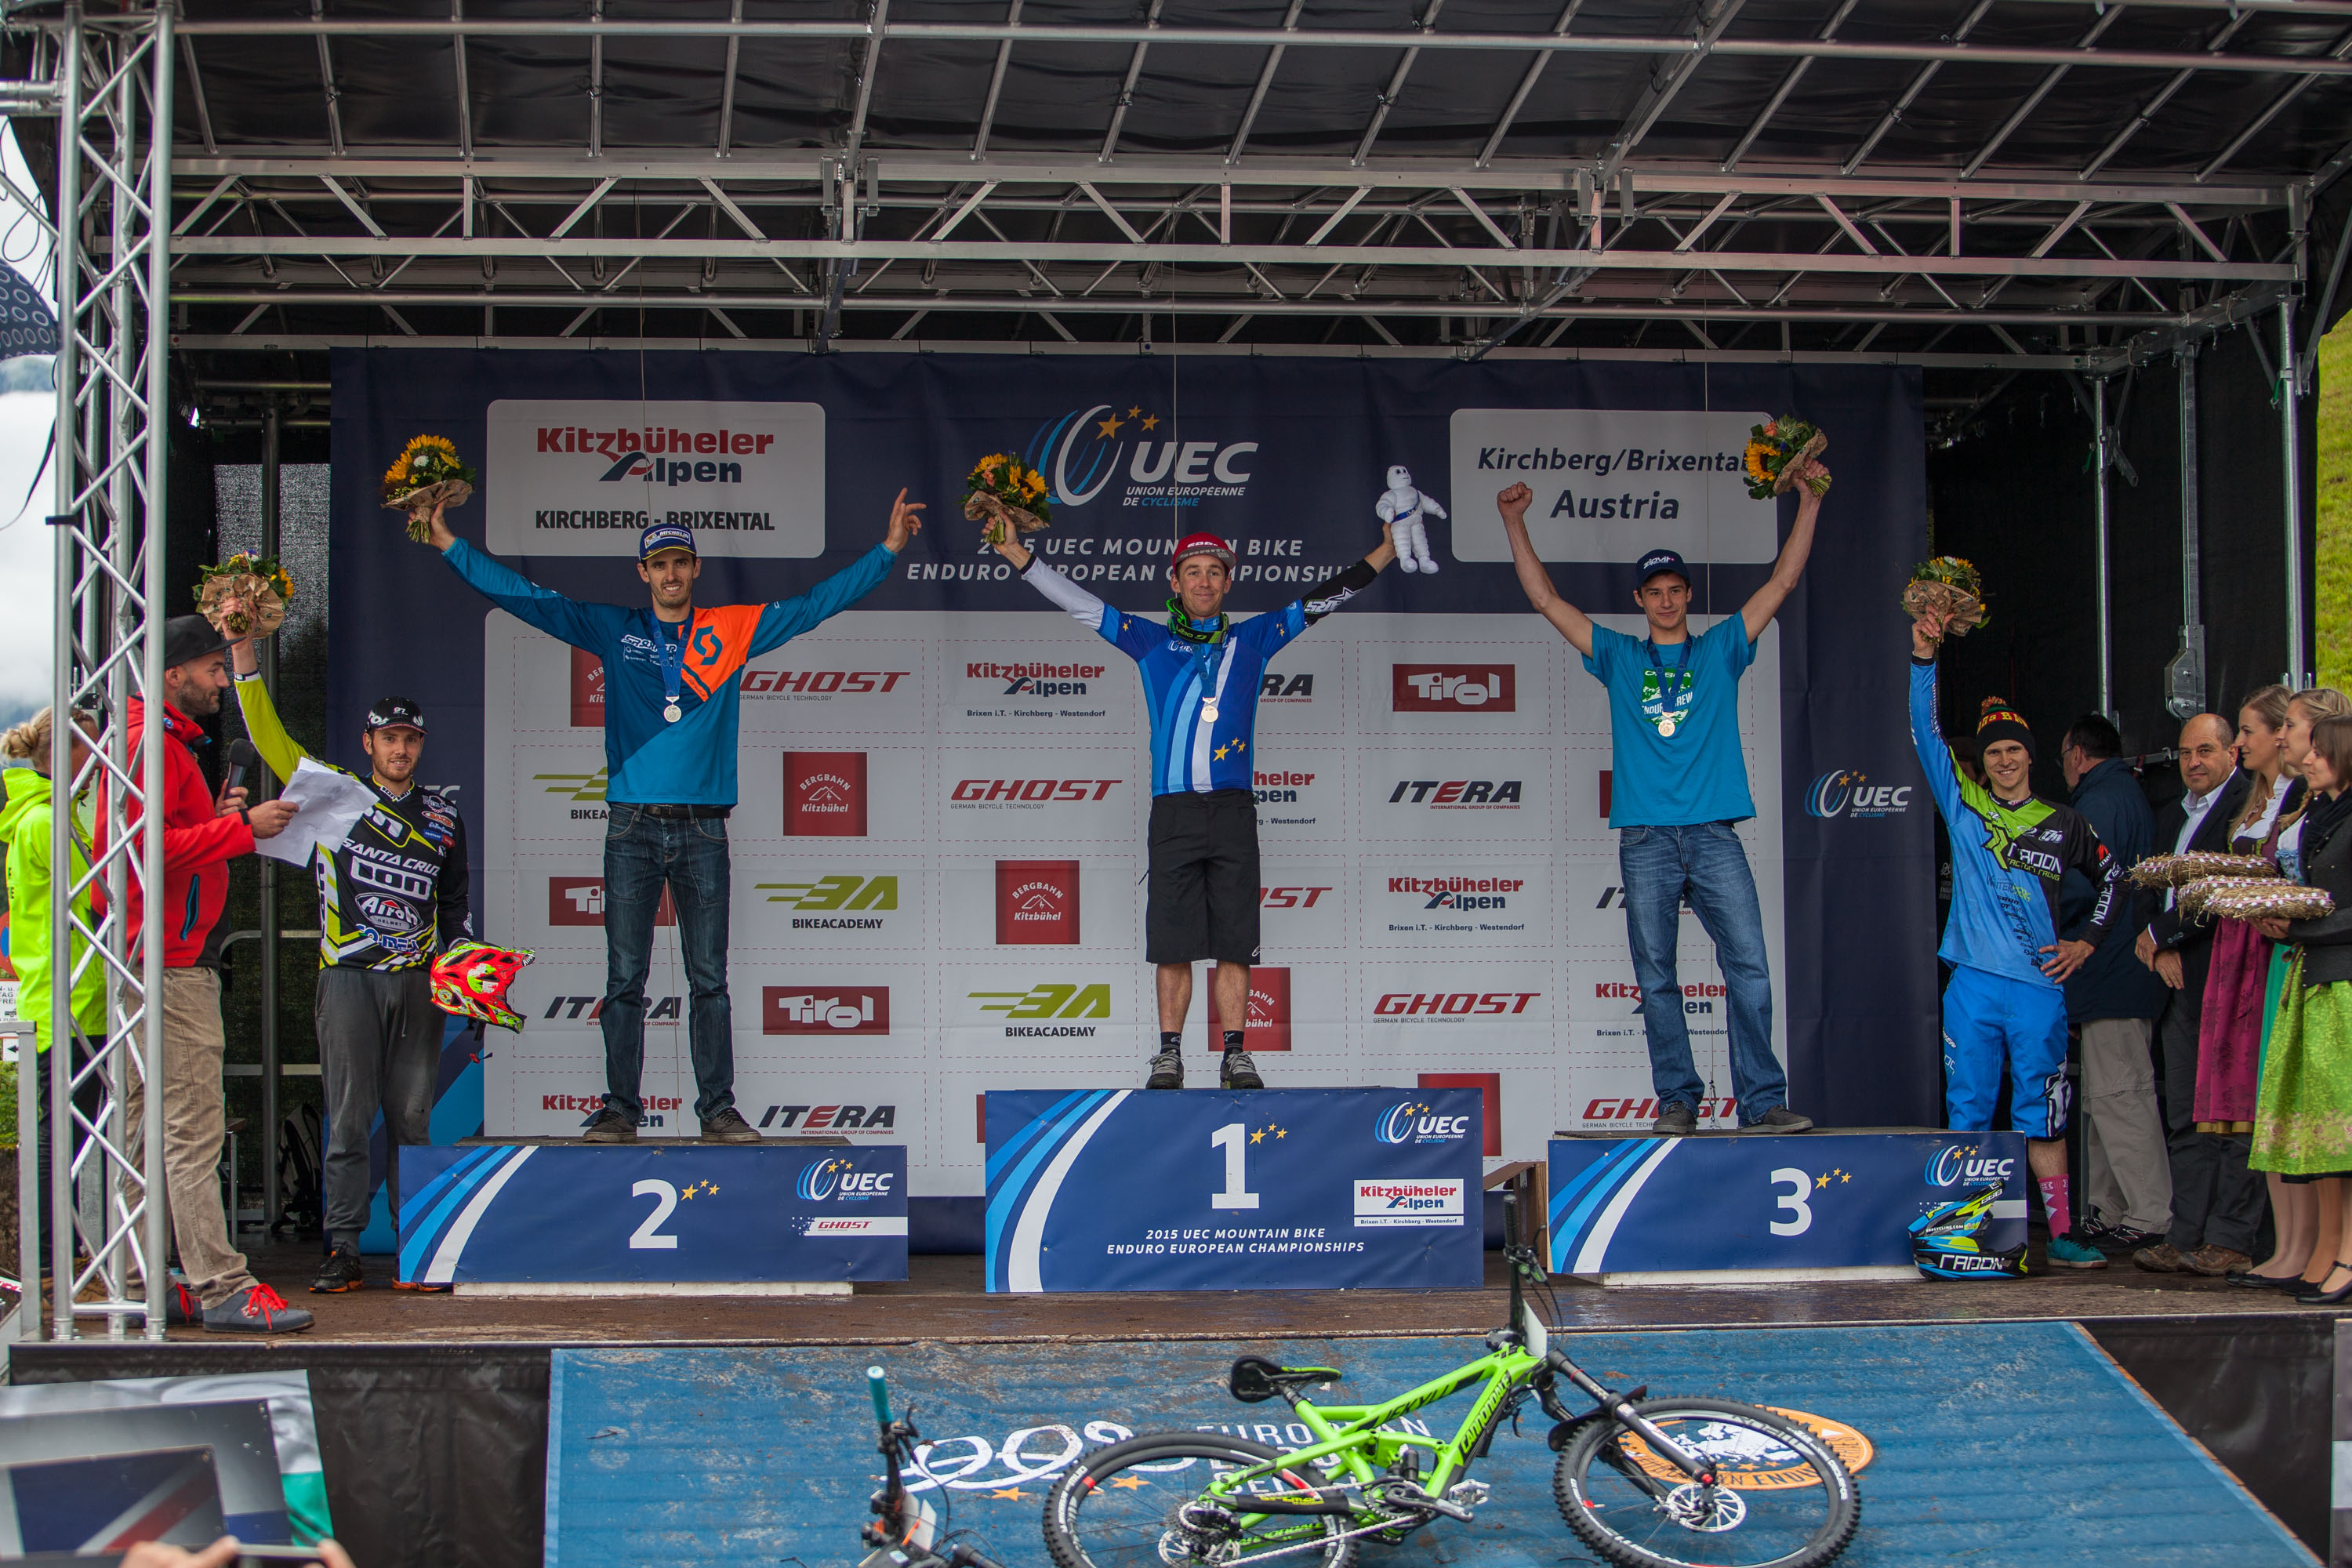 Ceremony awards at the 1st UEC MTB Enduro European Championships in Kirchberg, Tyrol, Austria, on June 21, 2015. Free image for editorial usage only: Photo by Antonio López Ordóñez.